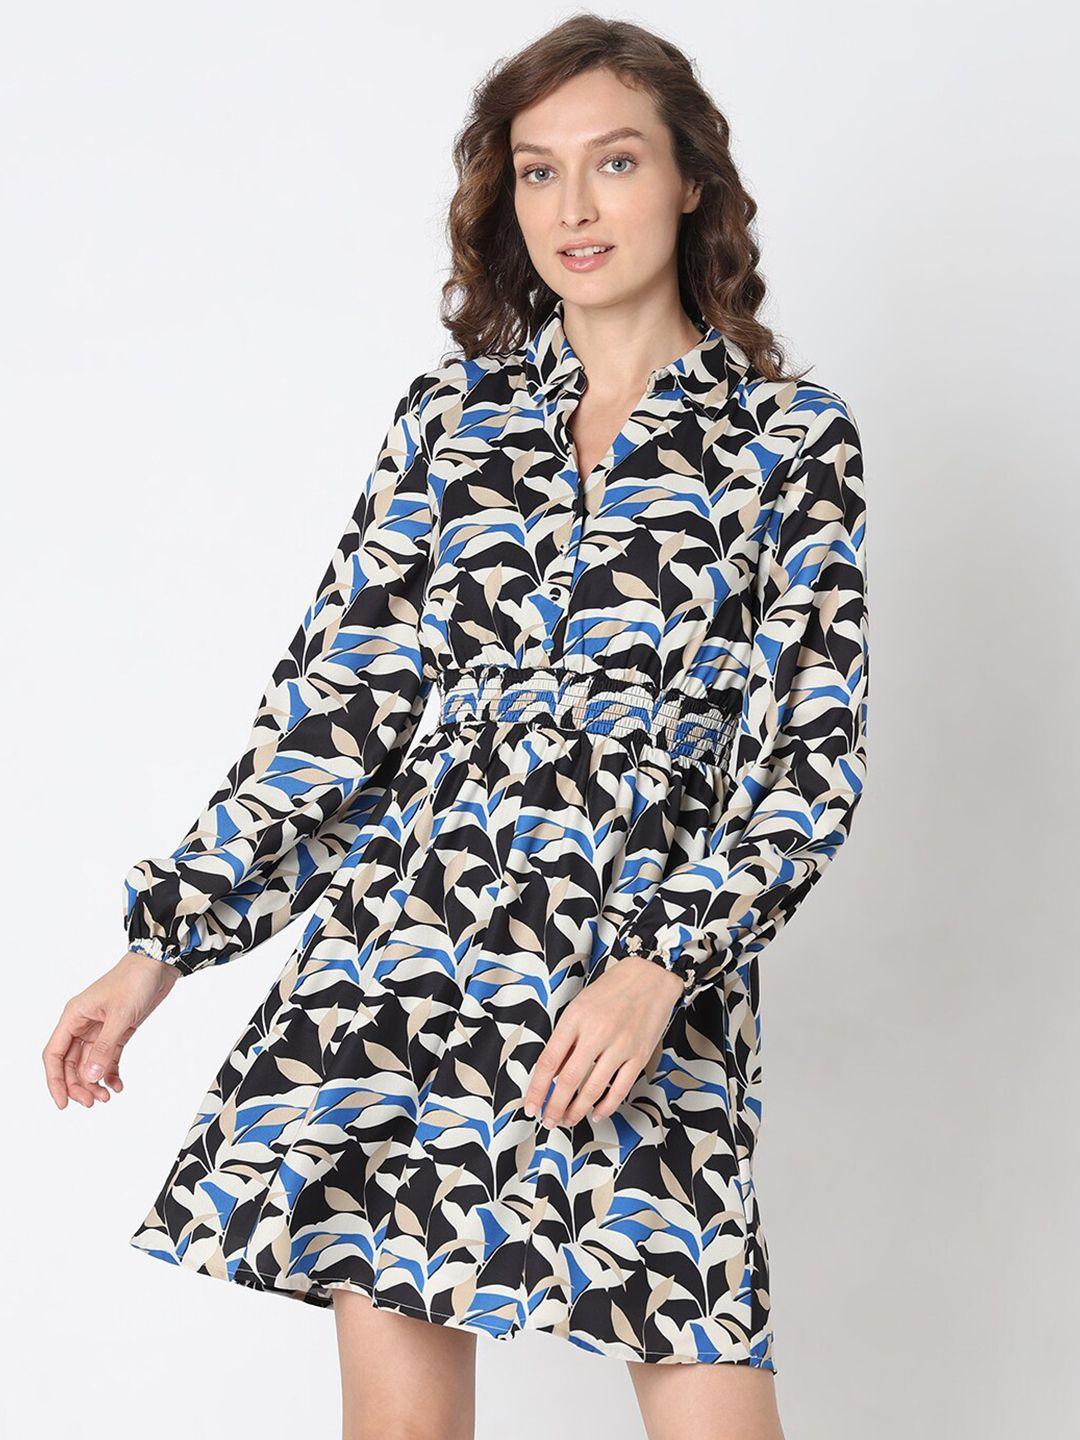 Vero Moda Tropical Printed Puff Sleeves Fit & Flare Dress